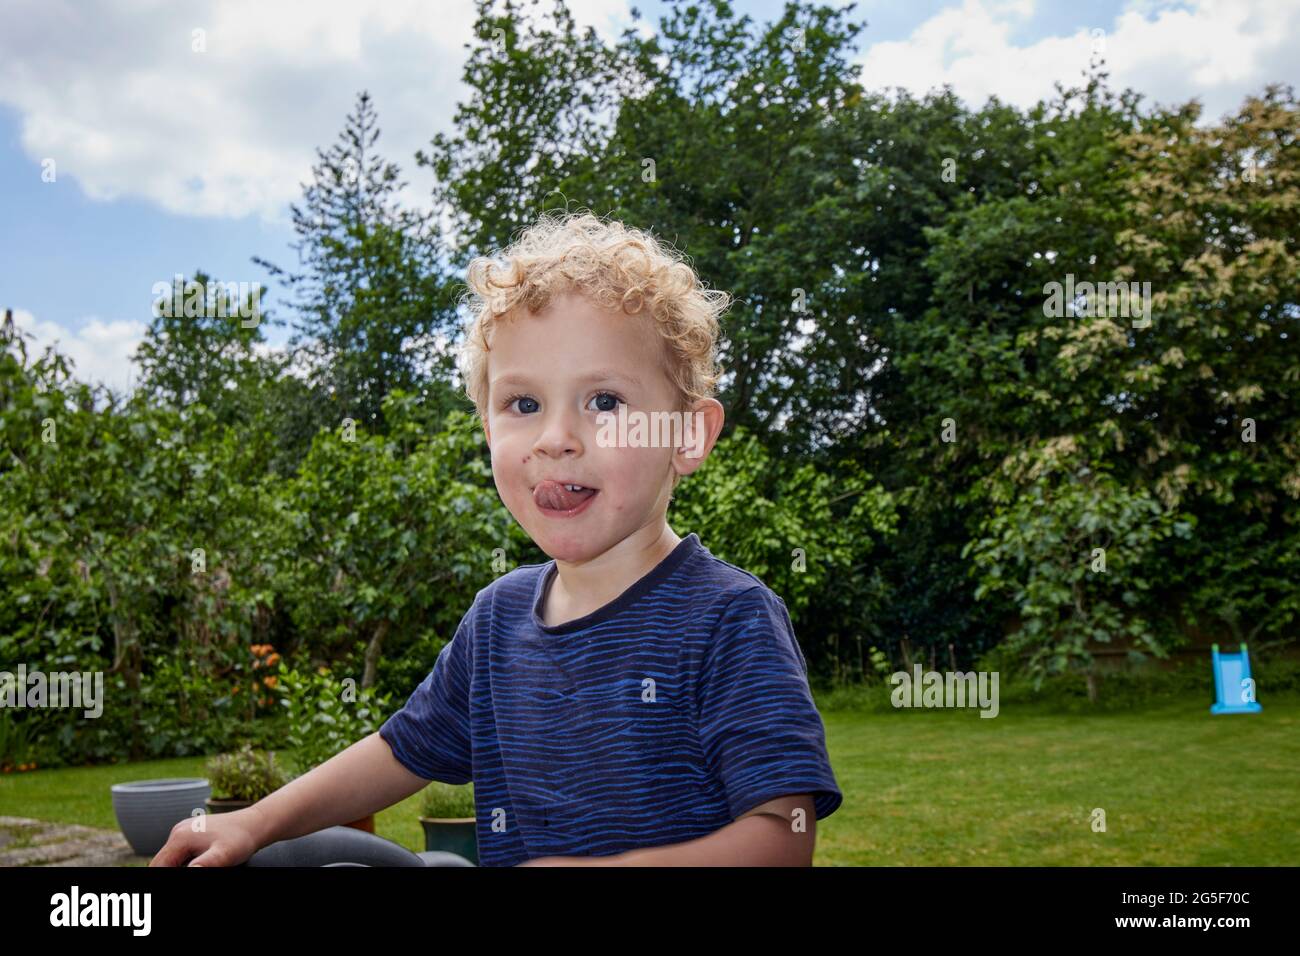 A happy white Caucasian small boy age nearly 3 with curly blond hair in a  garden